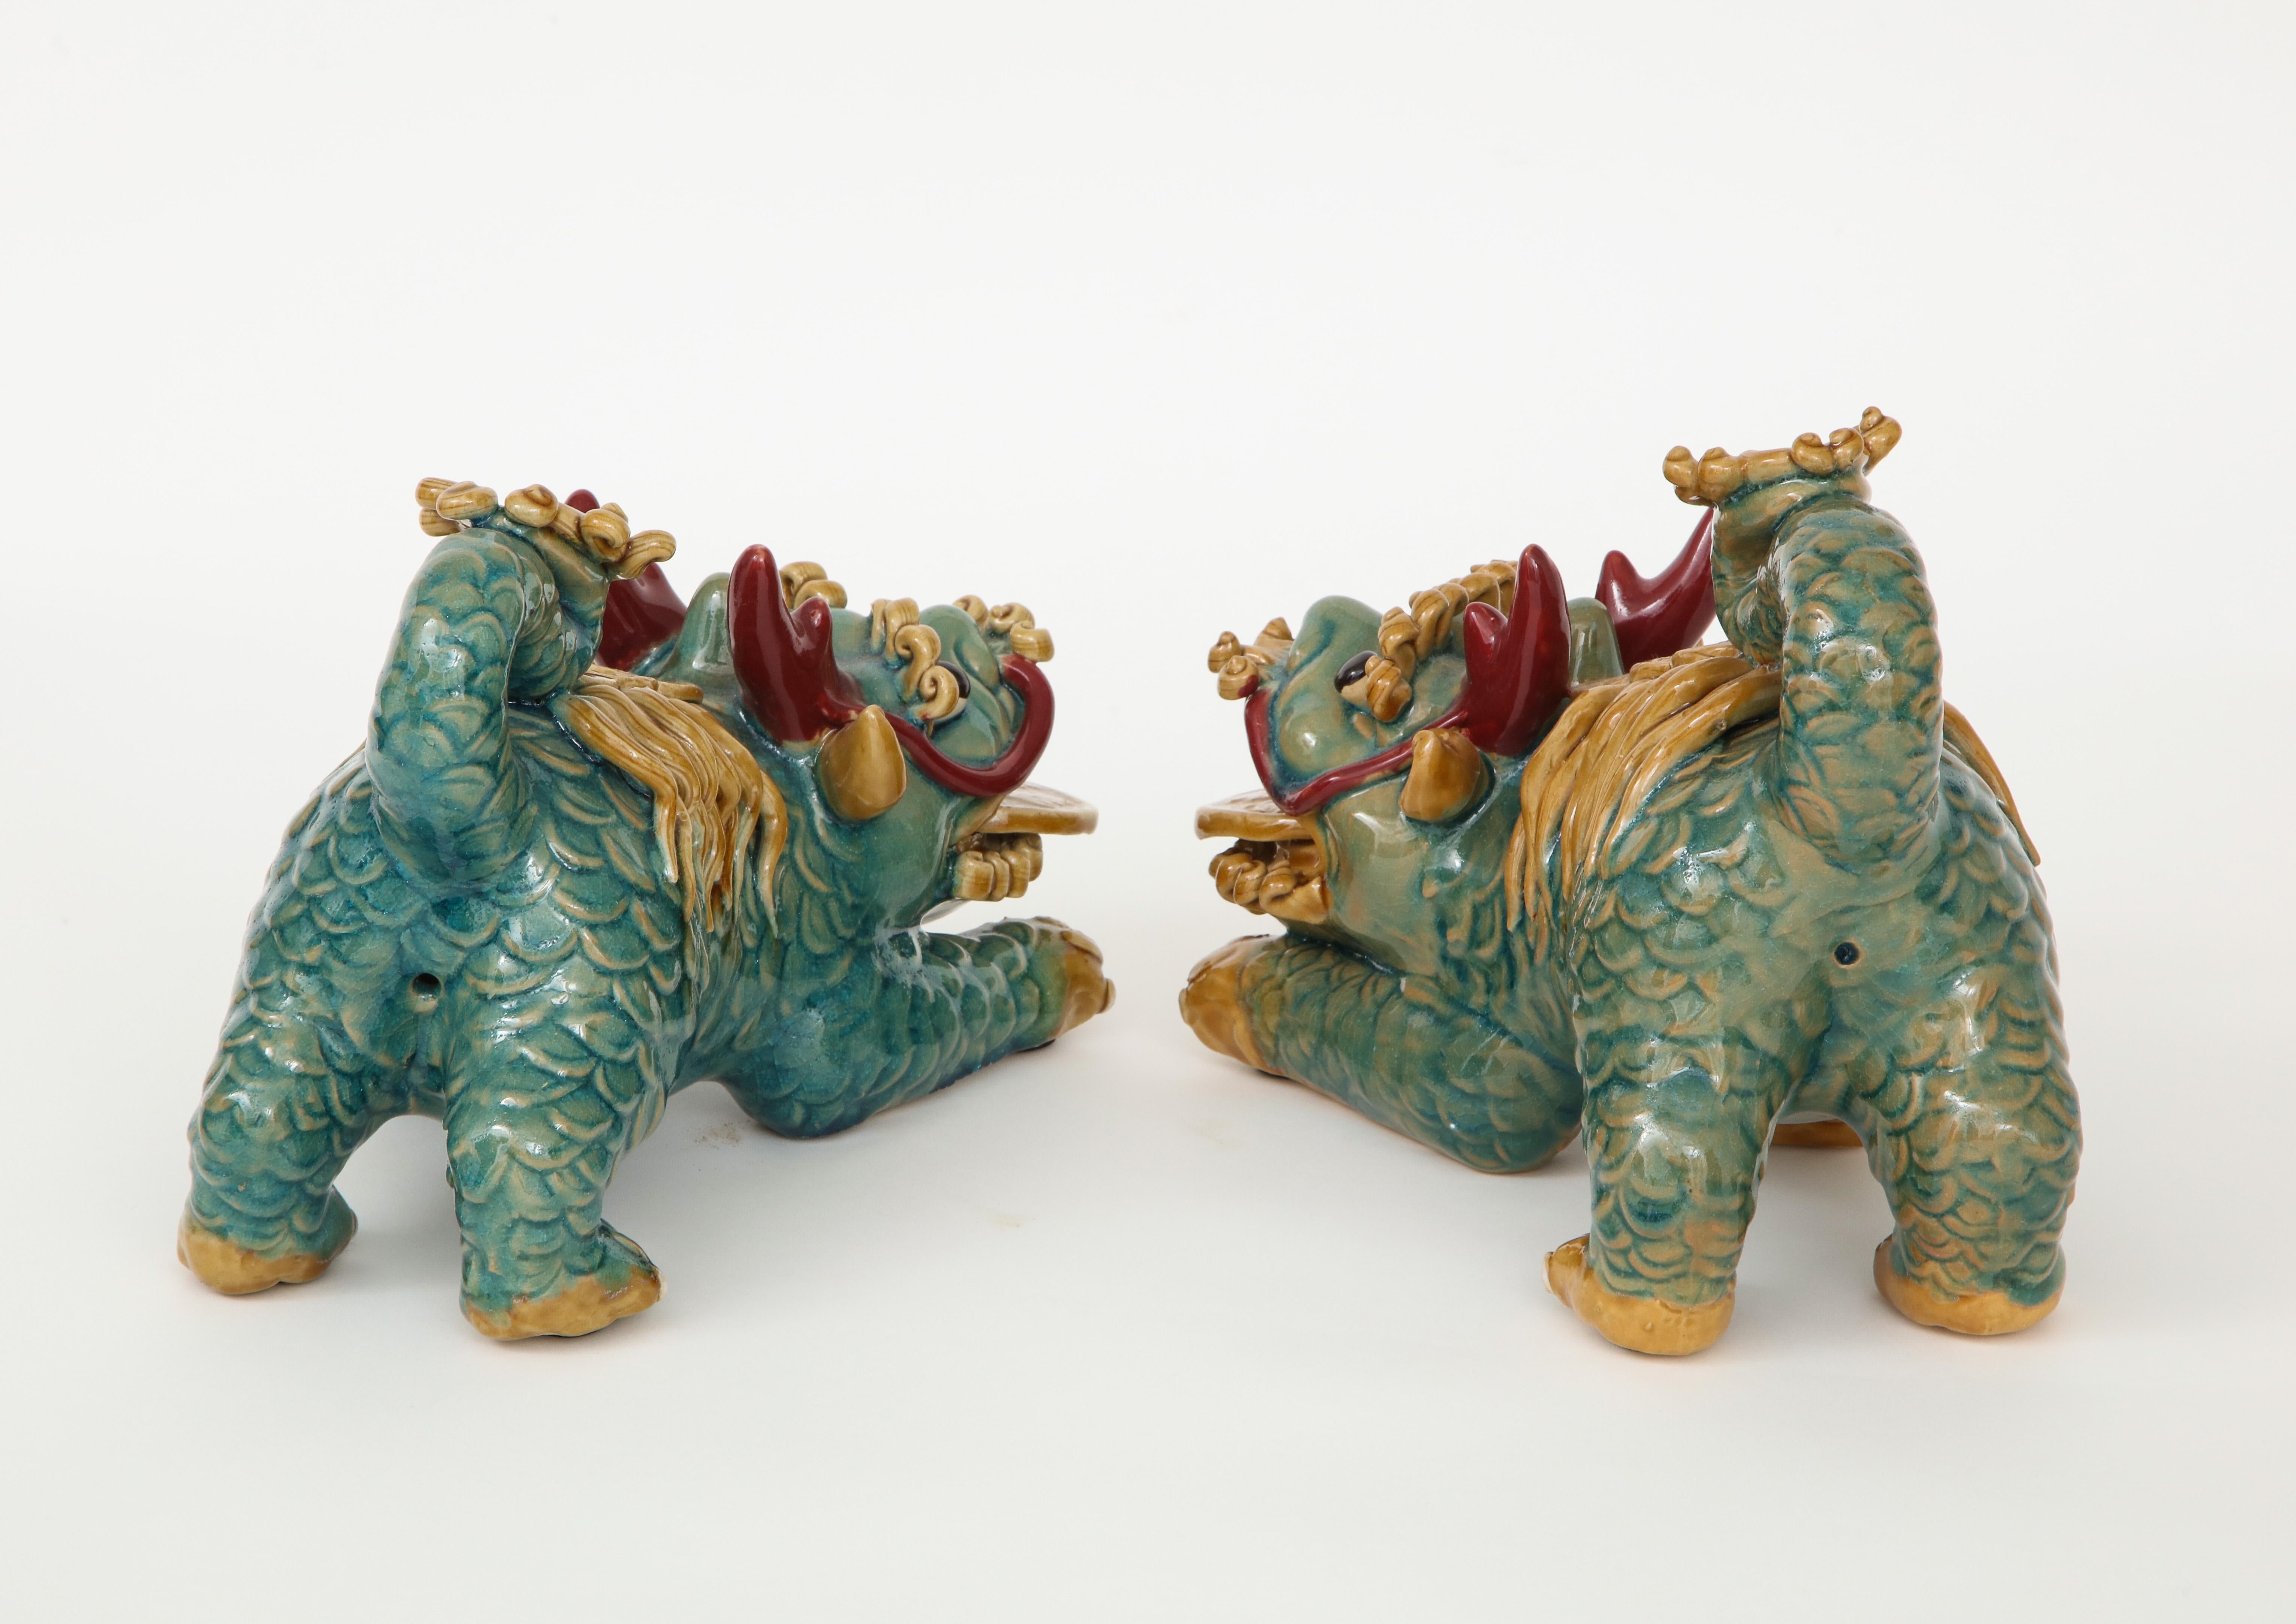 20th Century Midcentury Chinese Porcelain Foo Dogs